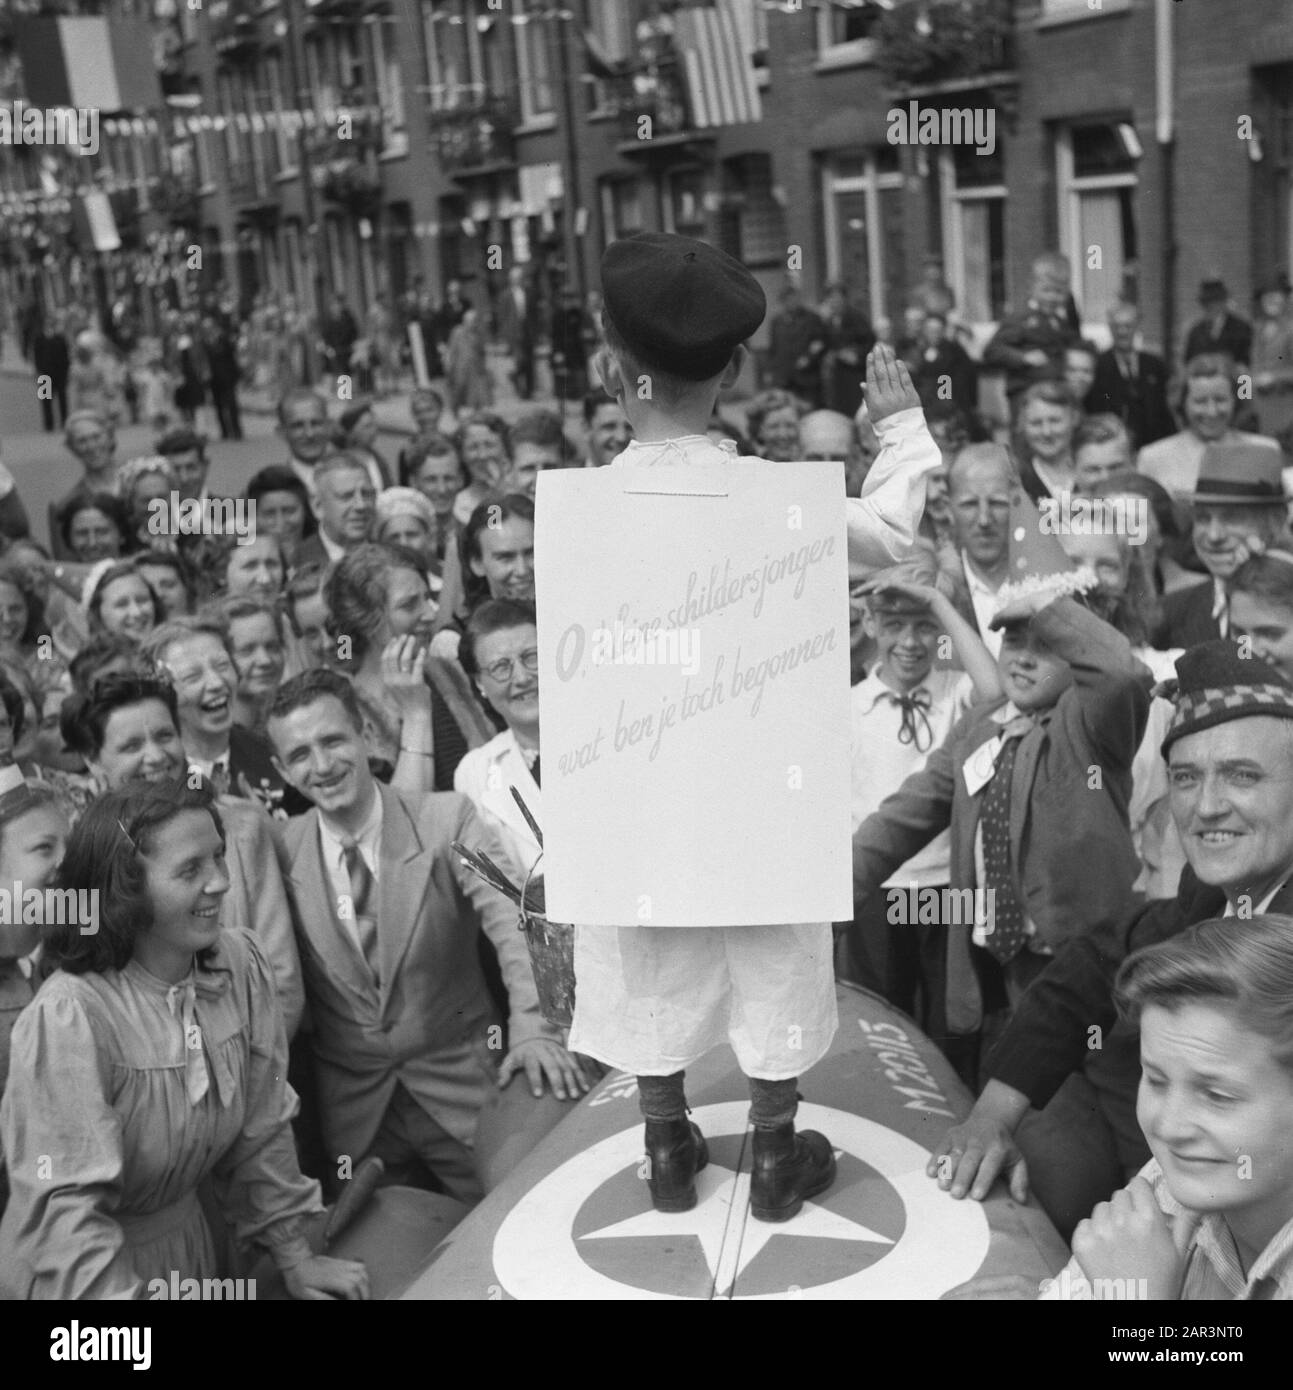 Folk entertainment in Amsterdam. Rep. of the various festivities after the liberation in the capital  [Boy dressed as the painter Hitler brings the Hitler greeting with on his back a sign showing O little painter boy what did you start] Date: June 28, 1945 Location: Amsterdam, Noord-Holland Keywords: Liberation festivals, World War II Stock Photo